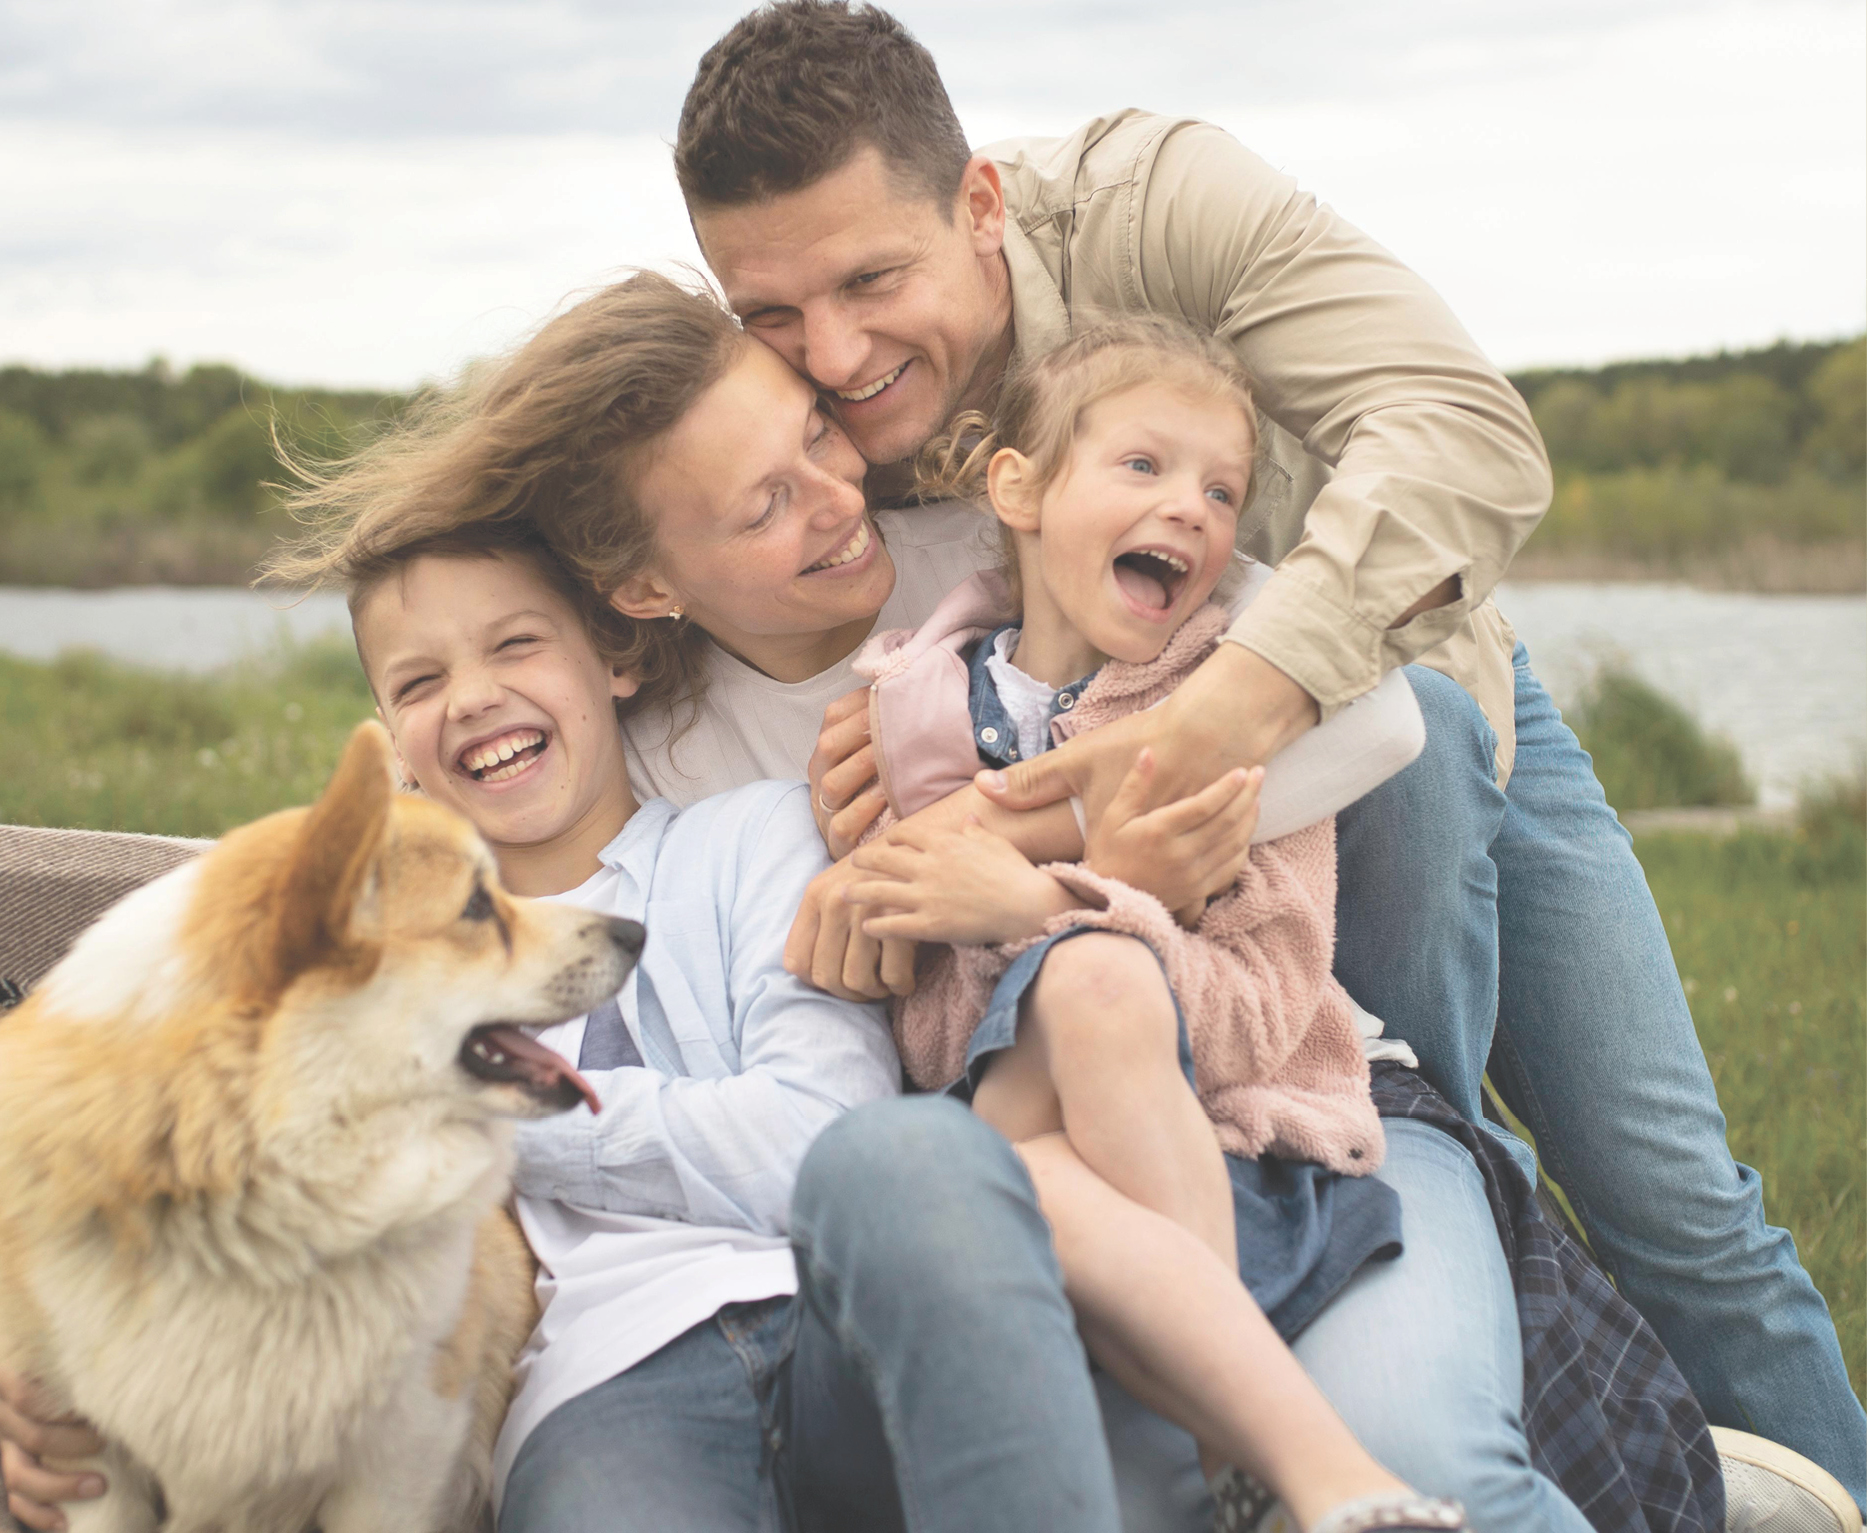 Family hugging outdoors with a dog